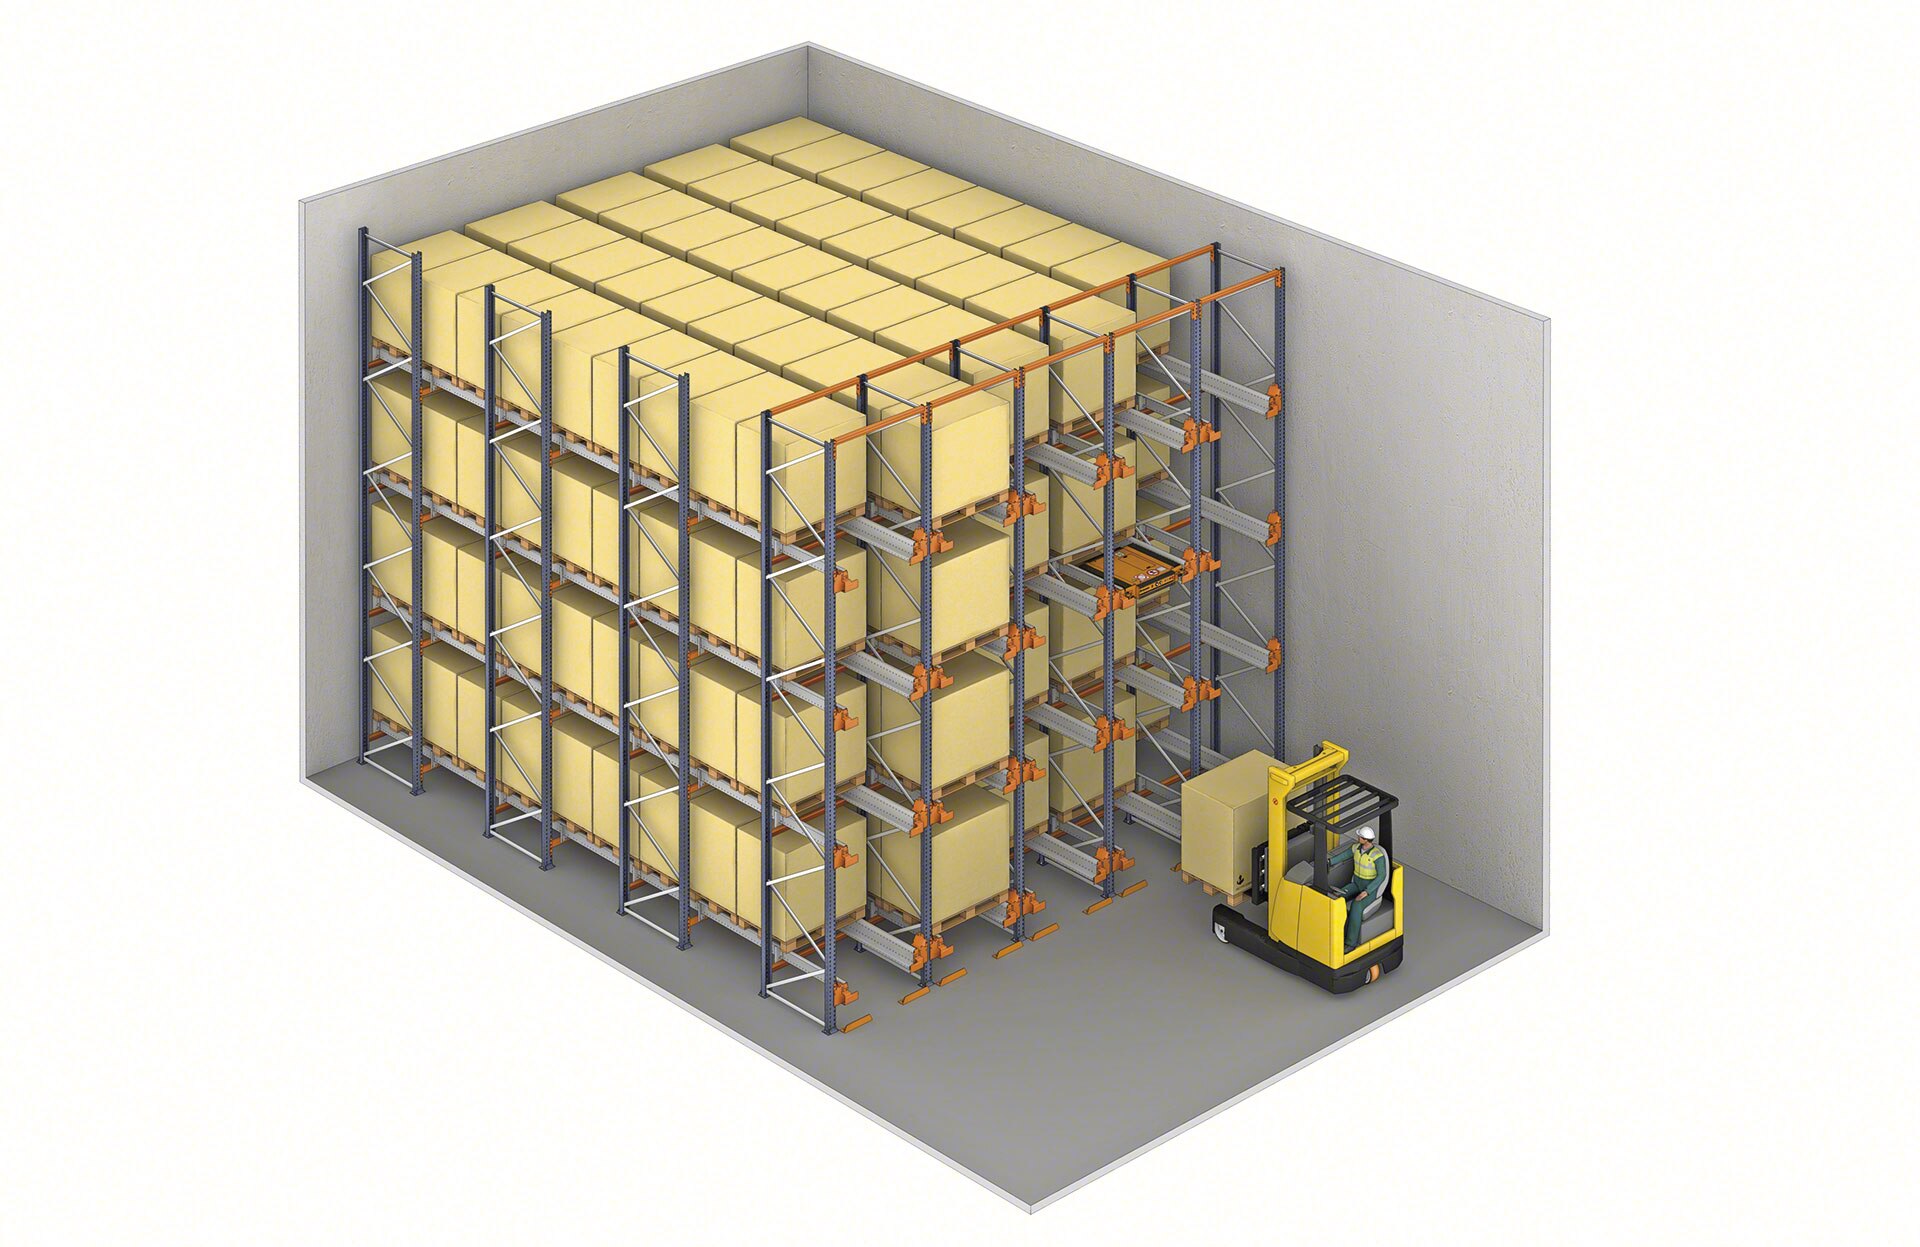 In a shuttle rack system, forklifts need not drive inside the storage lanes